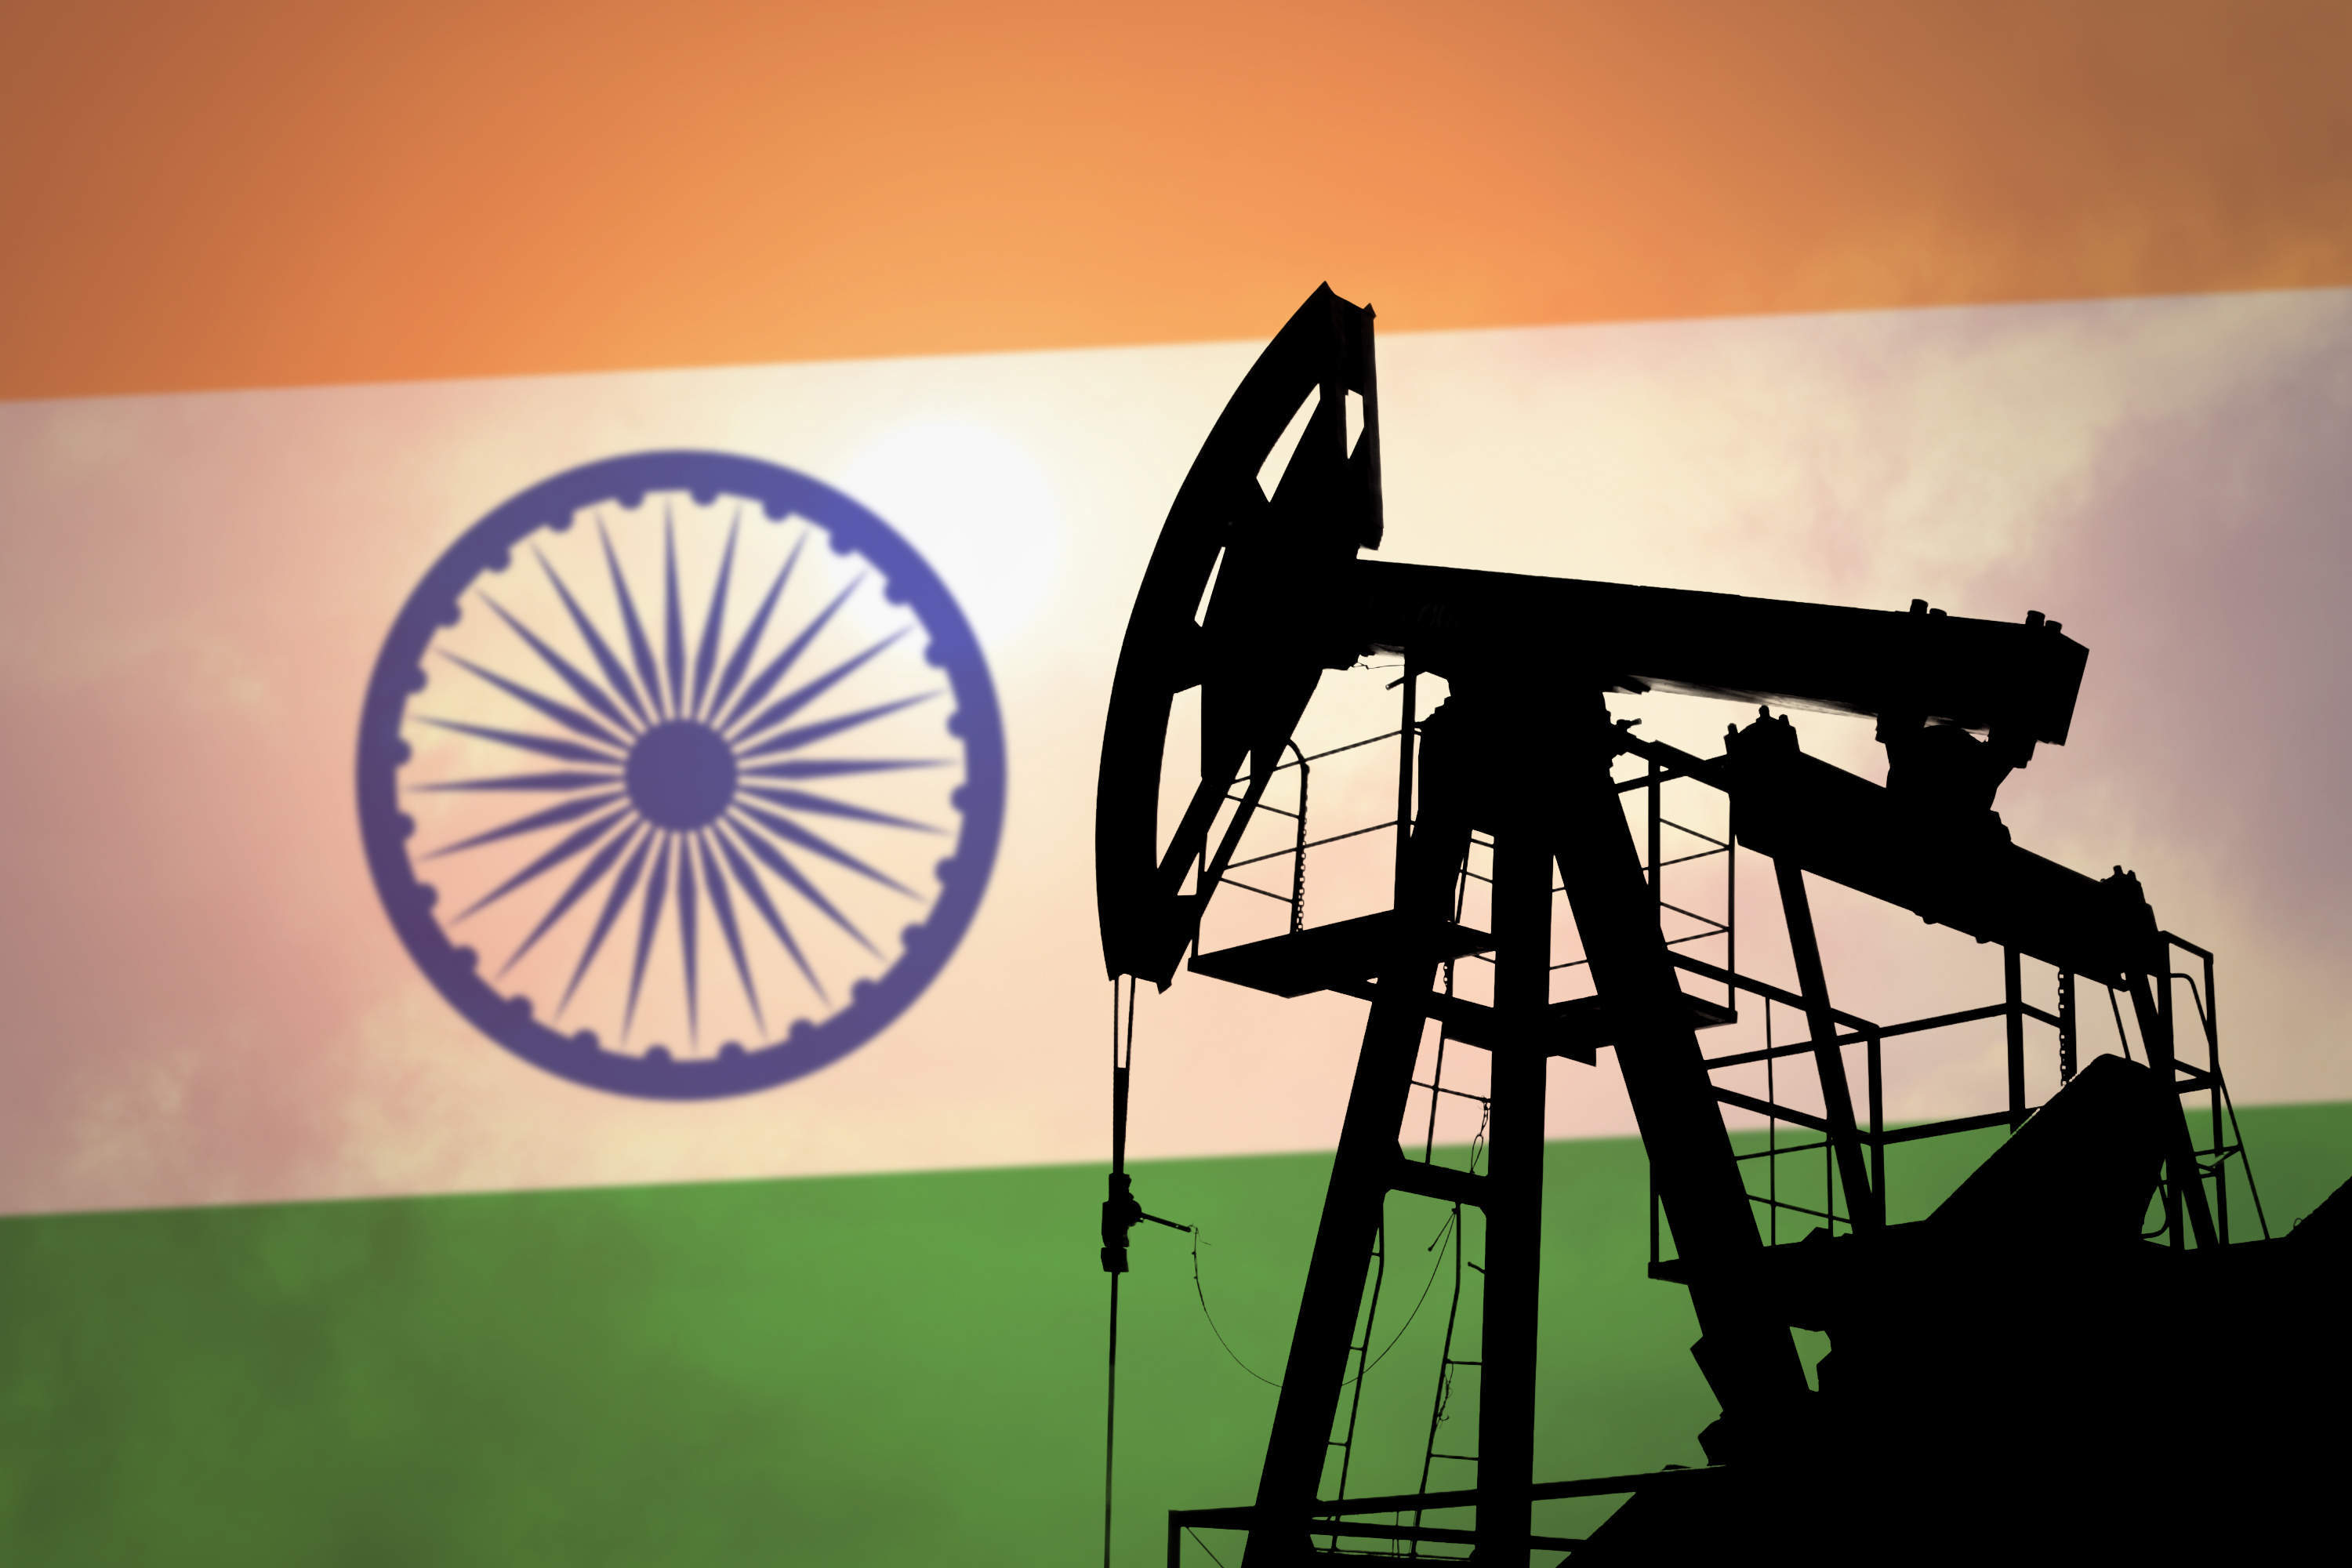 India is set to overtake China in terms of oil demand growth by 2024. Here’s why